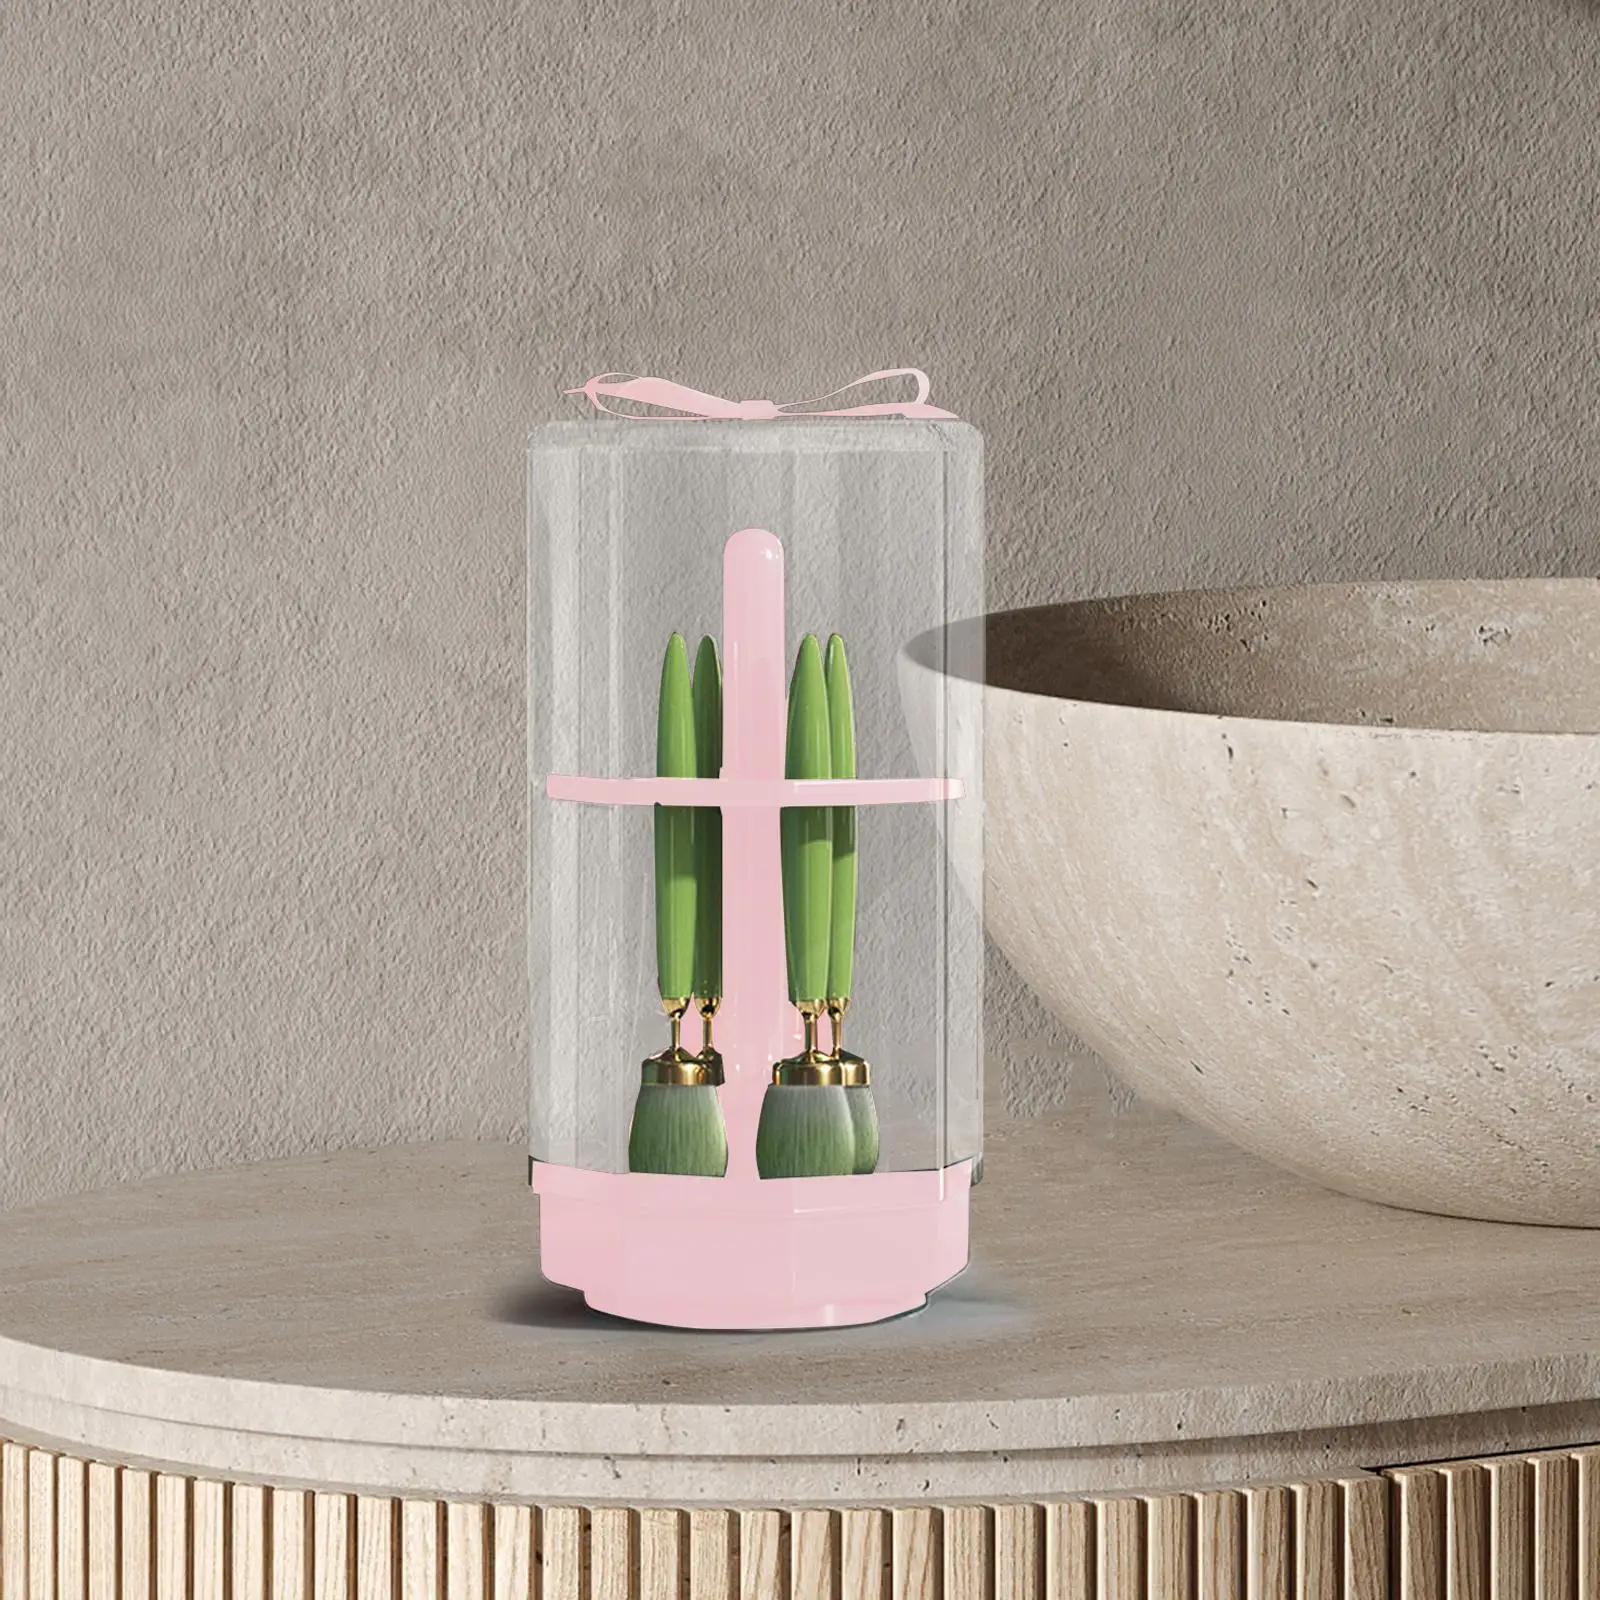 Dustproof Makeup Brush Drying Rack Makeup Supplies Anti Slip with Cover Brush Holder Storage Container for Vanity Table Desktop